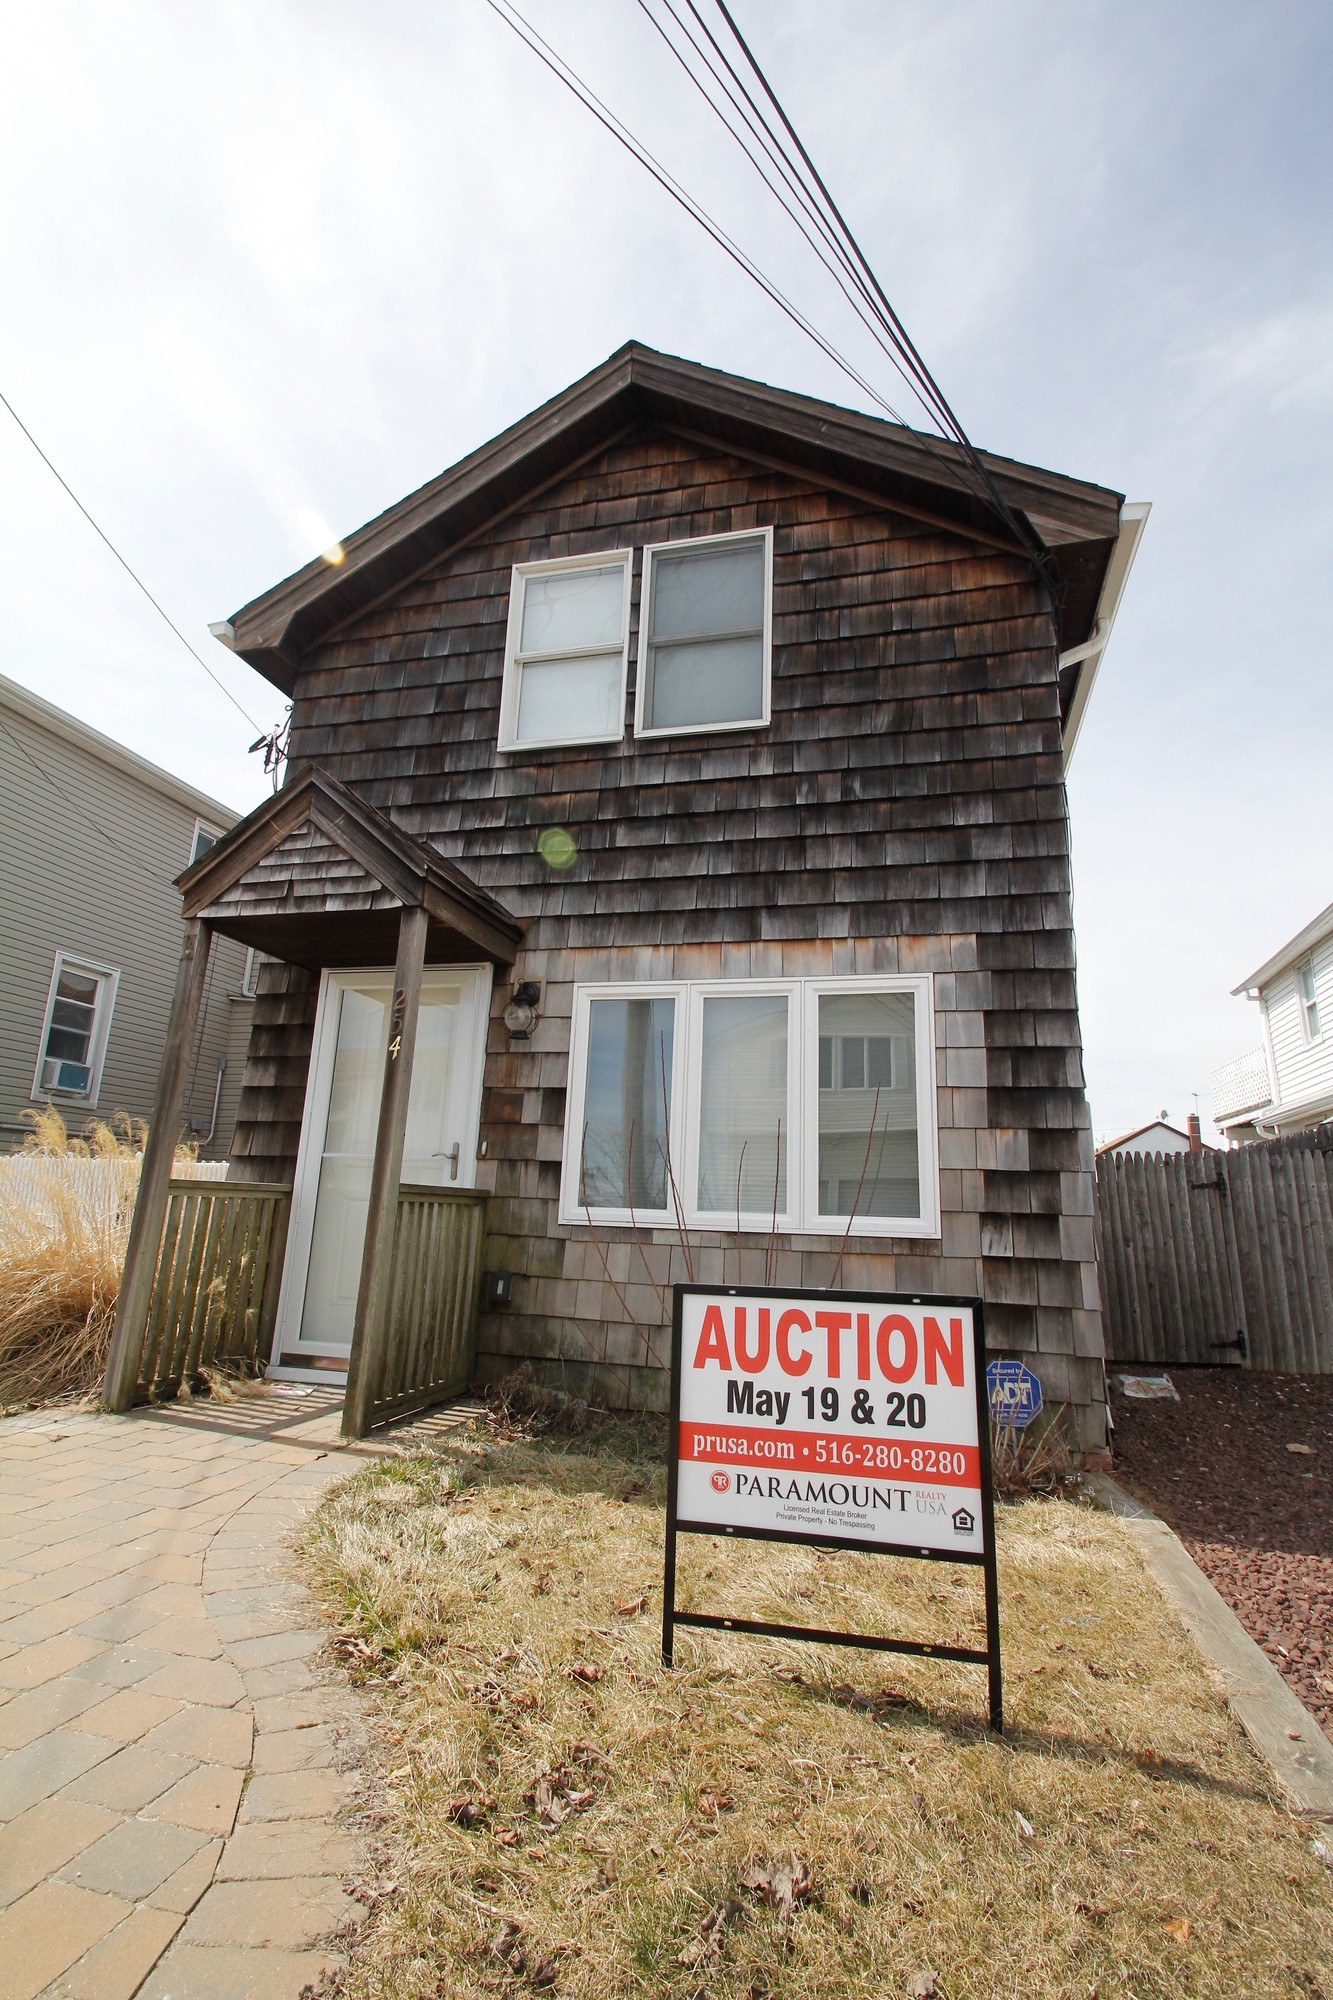 This Sandy damaged house in Freeport was up for auction last week.